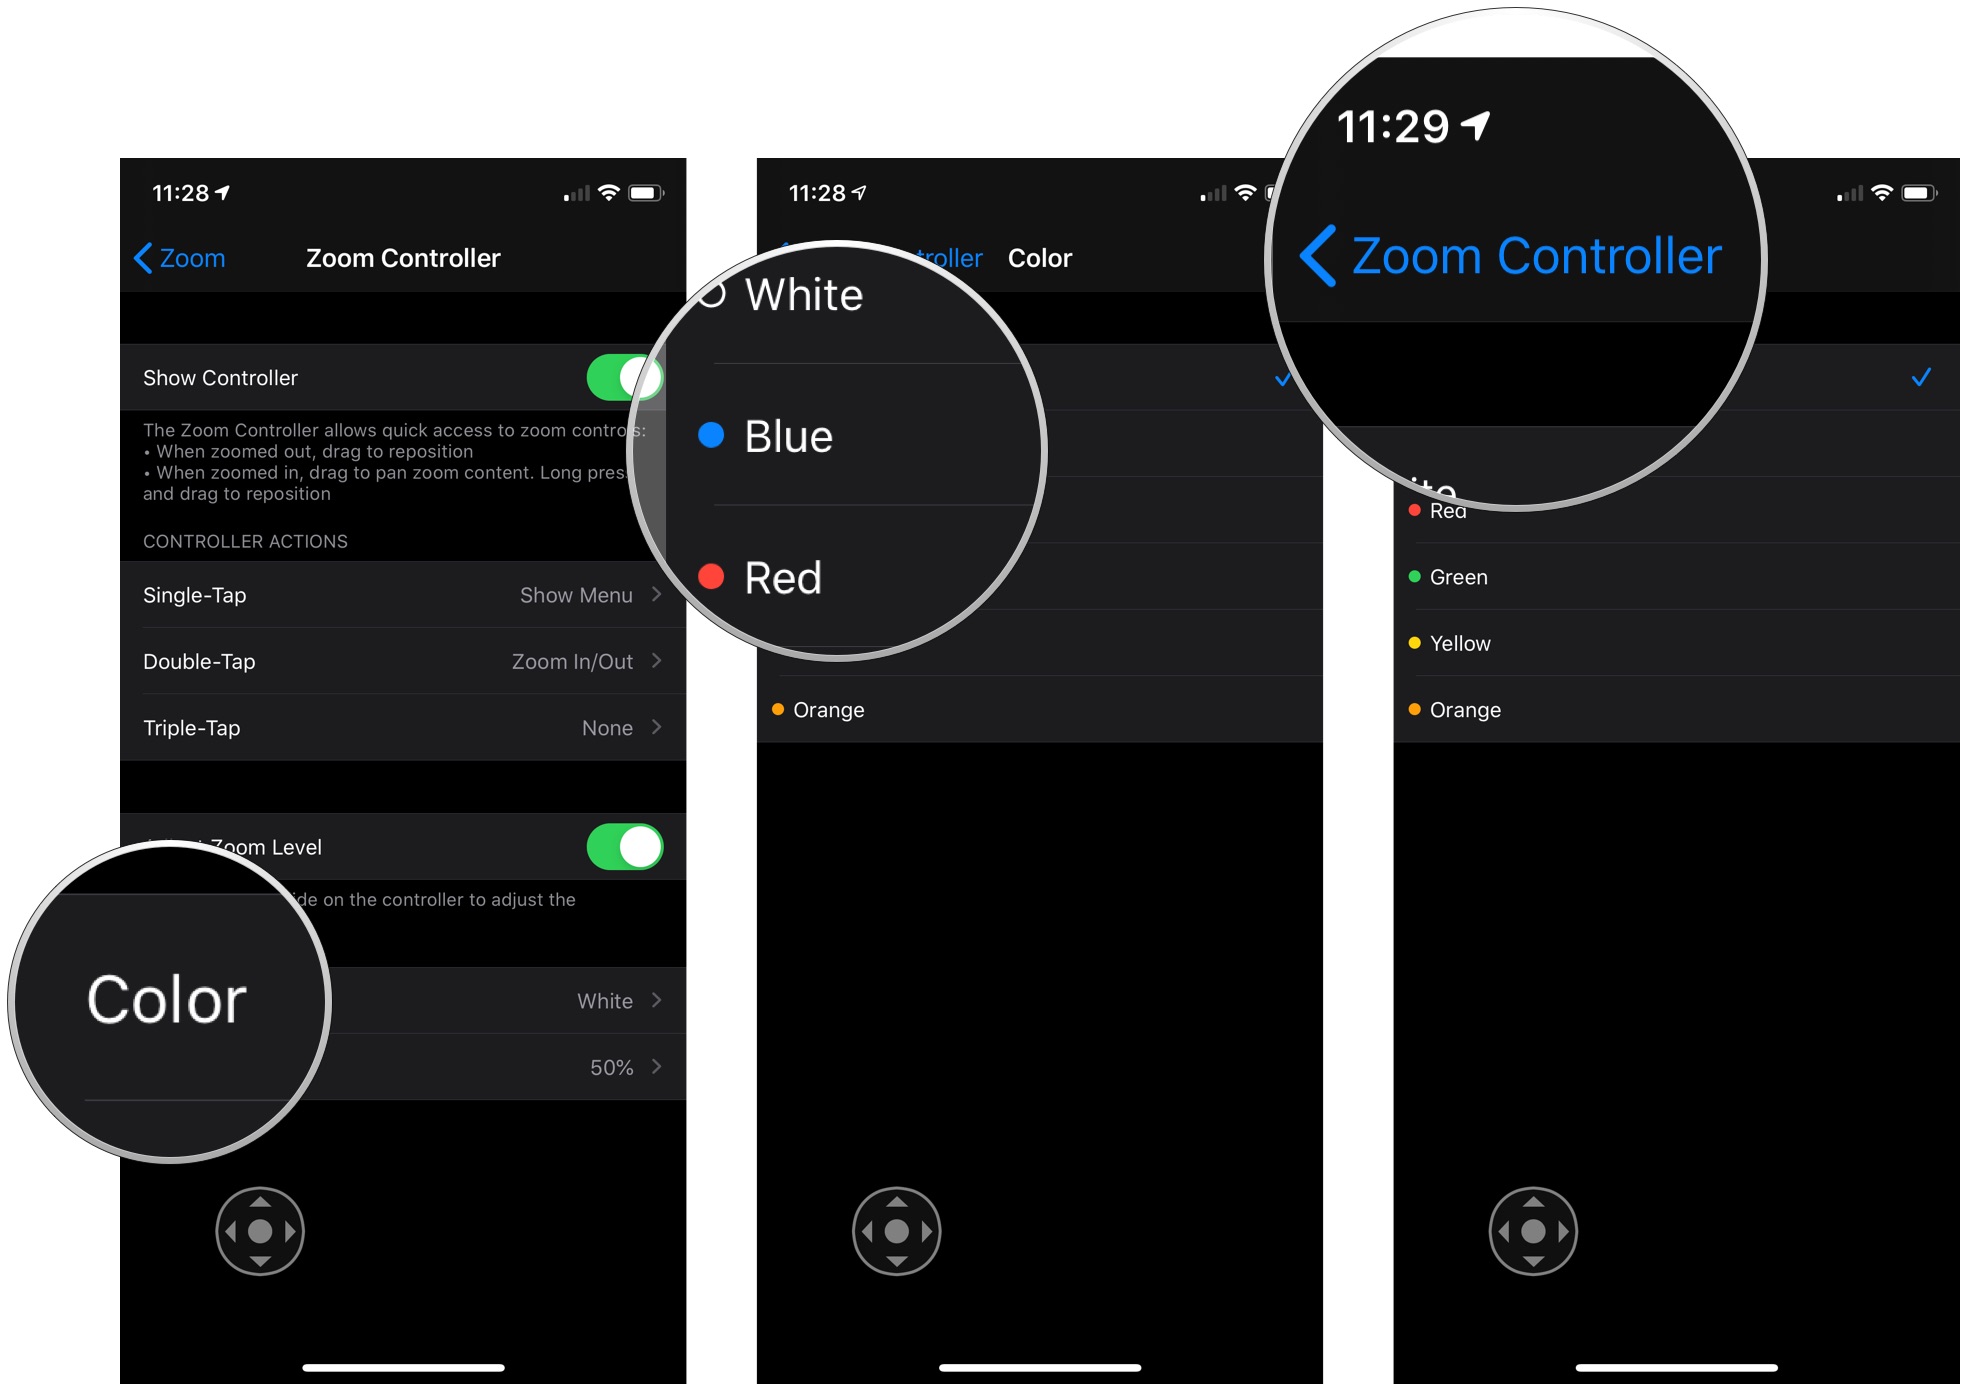 Enable the Zoom Controller showing how to tap Color, tap the color you want the Zoom Controller to be, then tap Zoom Controller to move back